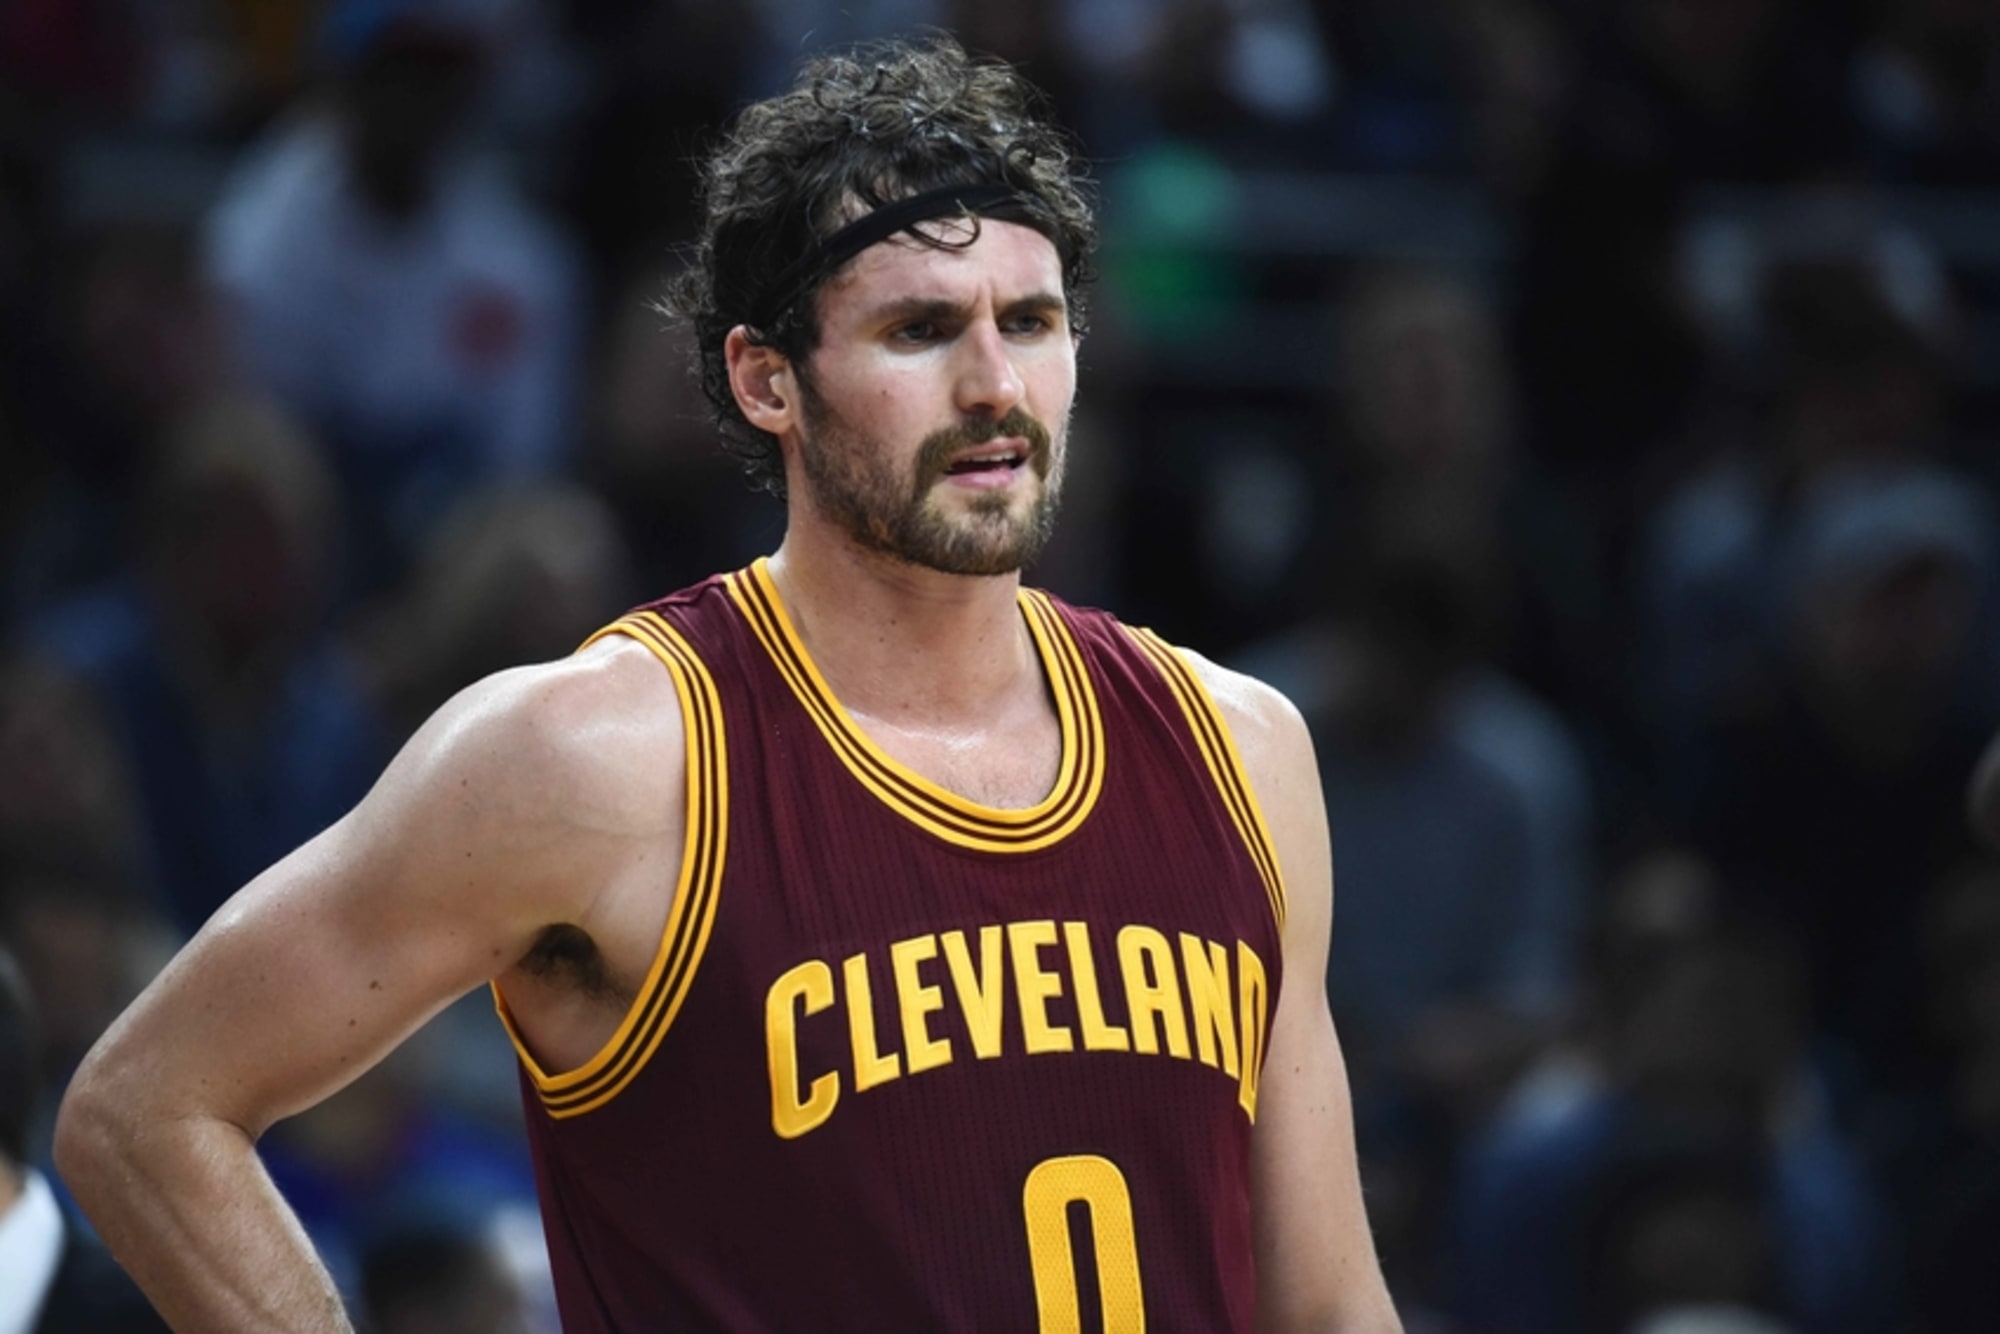 kevin love all star